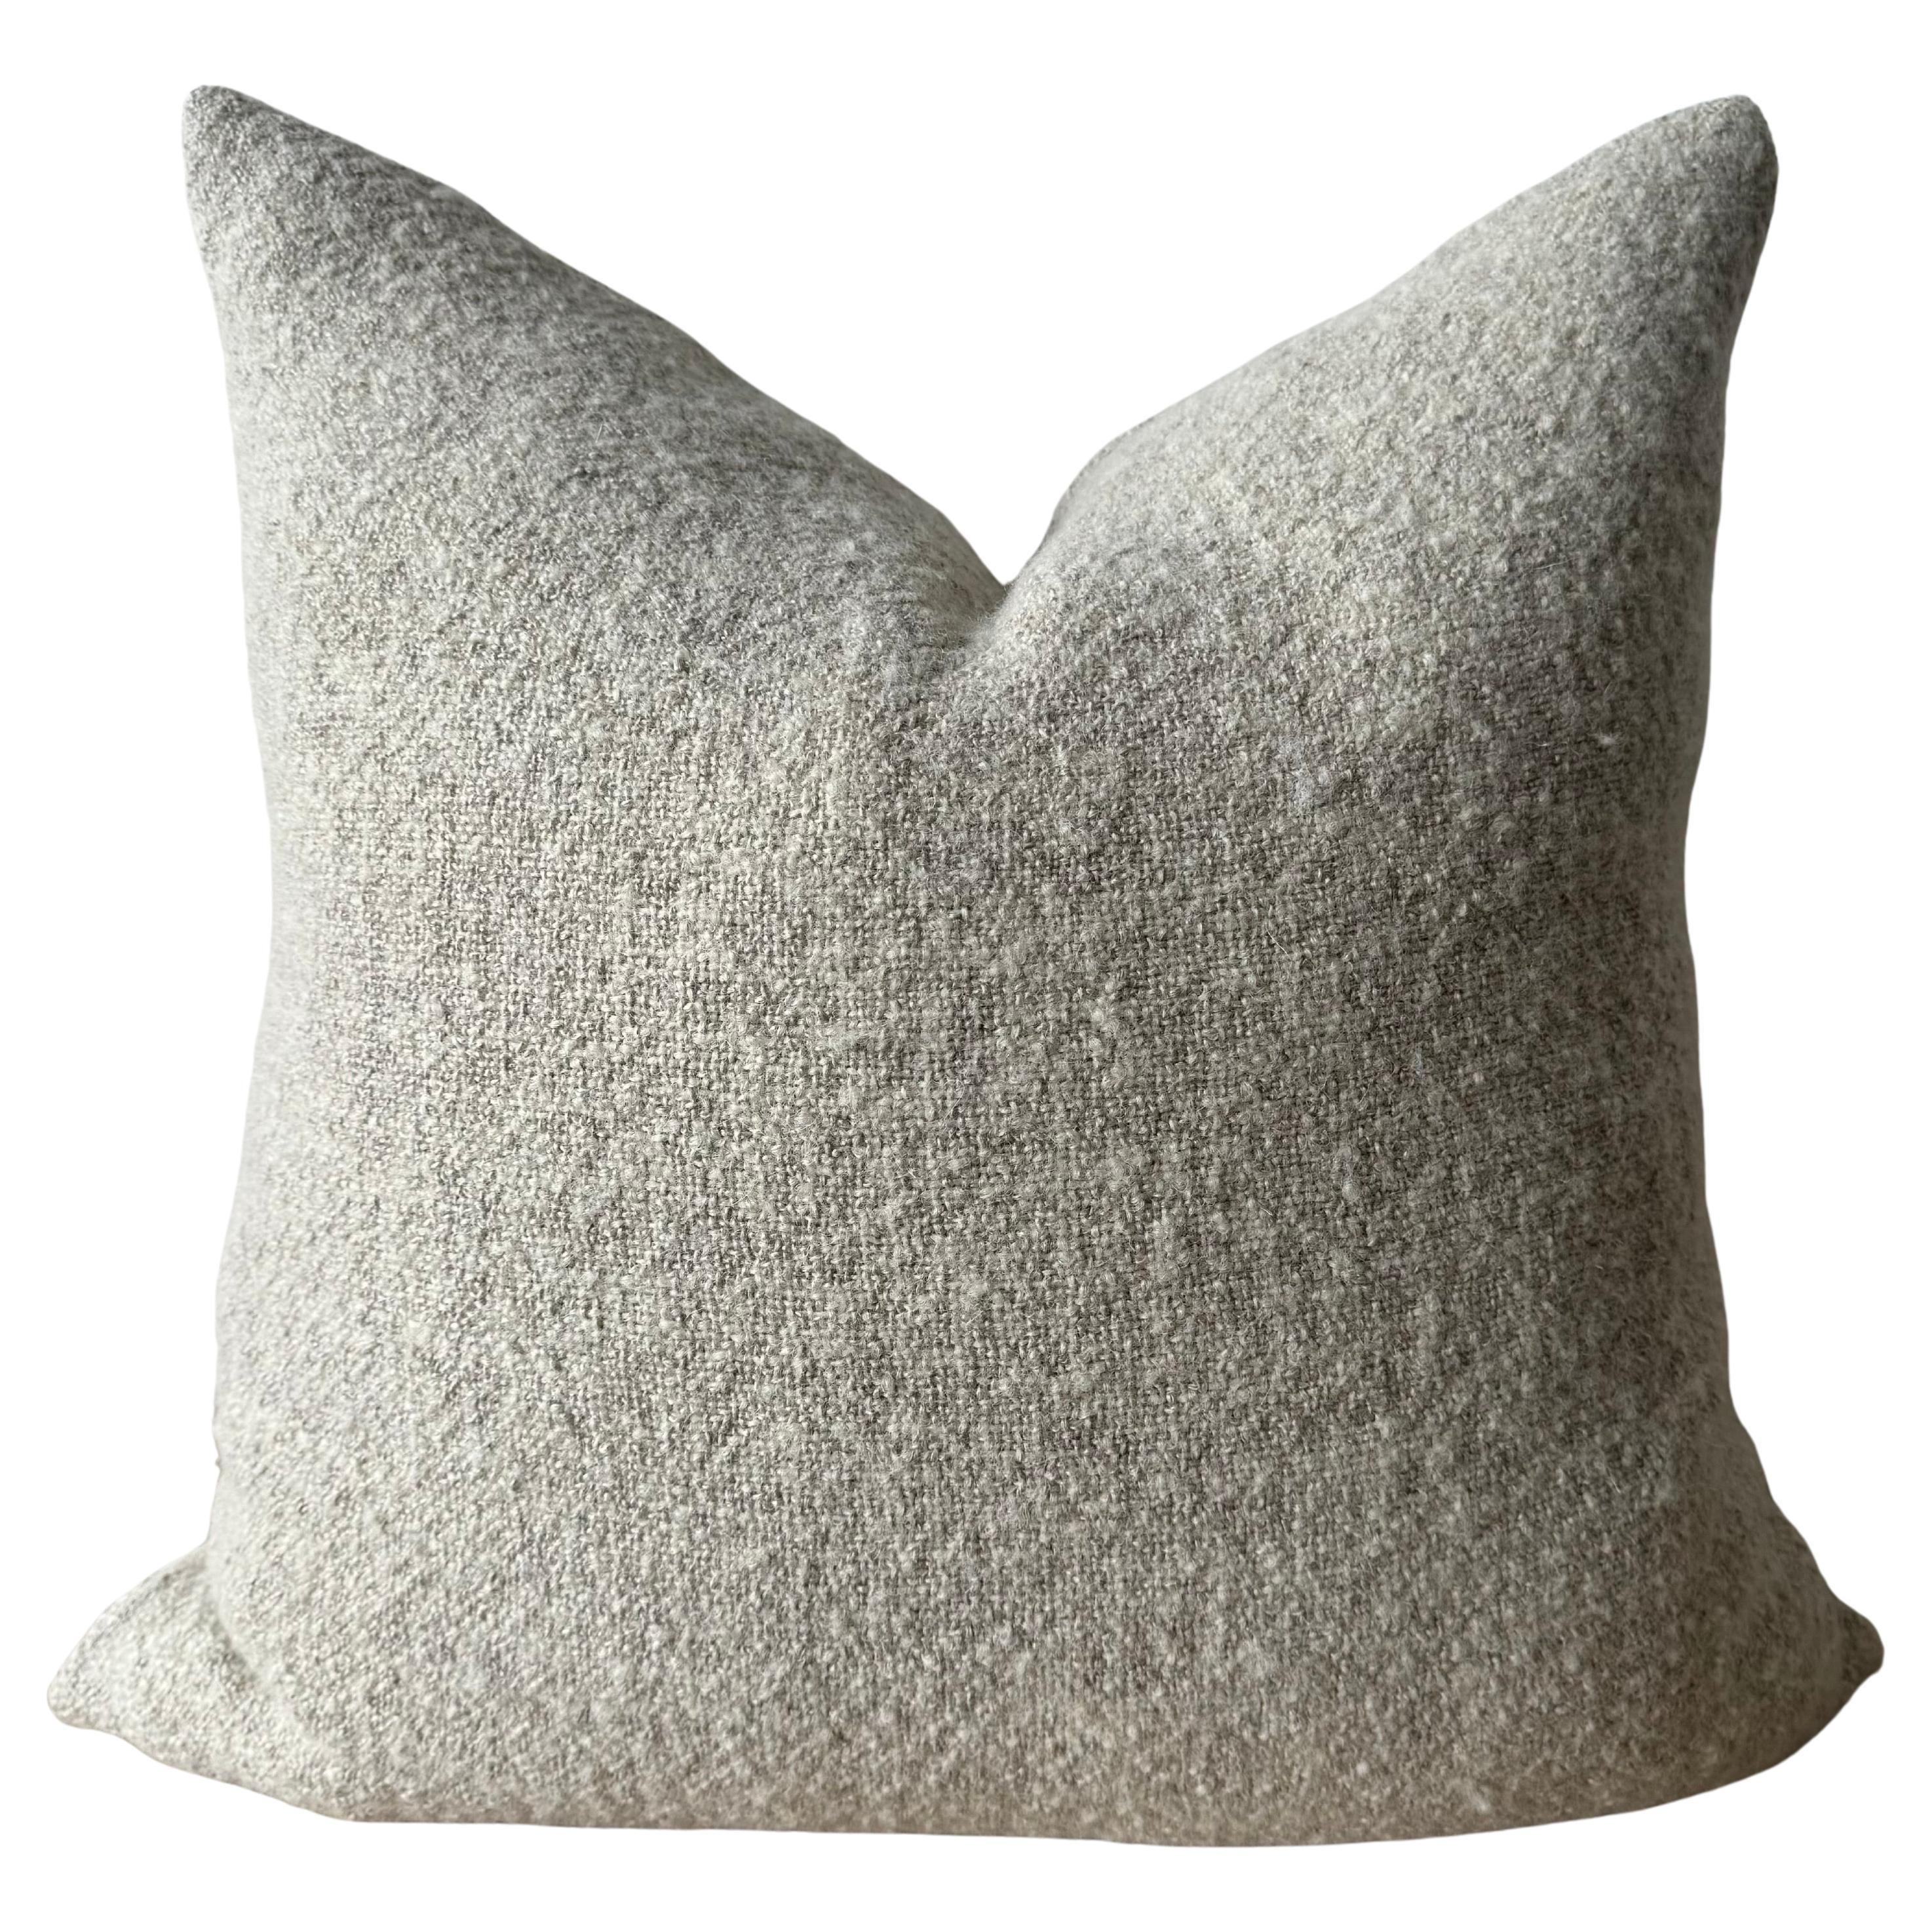 Custom Linen and Wool Pillow in Flax with Down Feather Insert